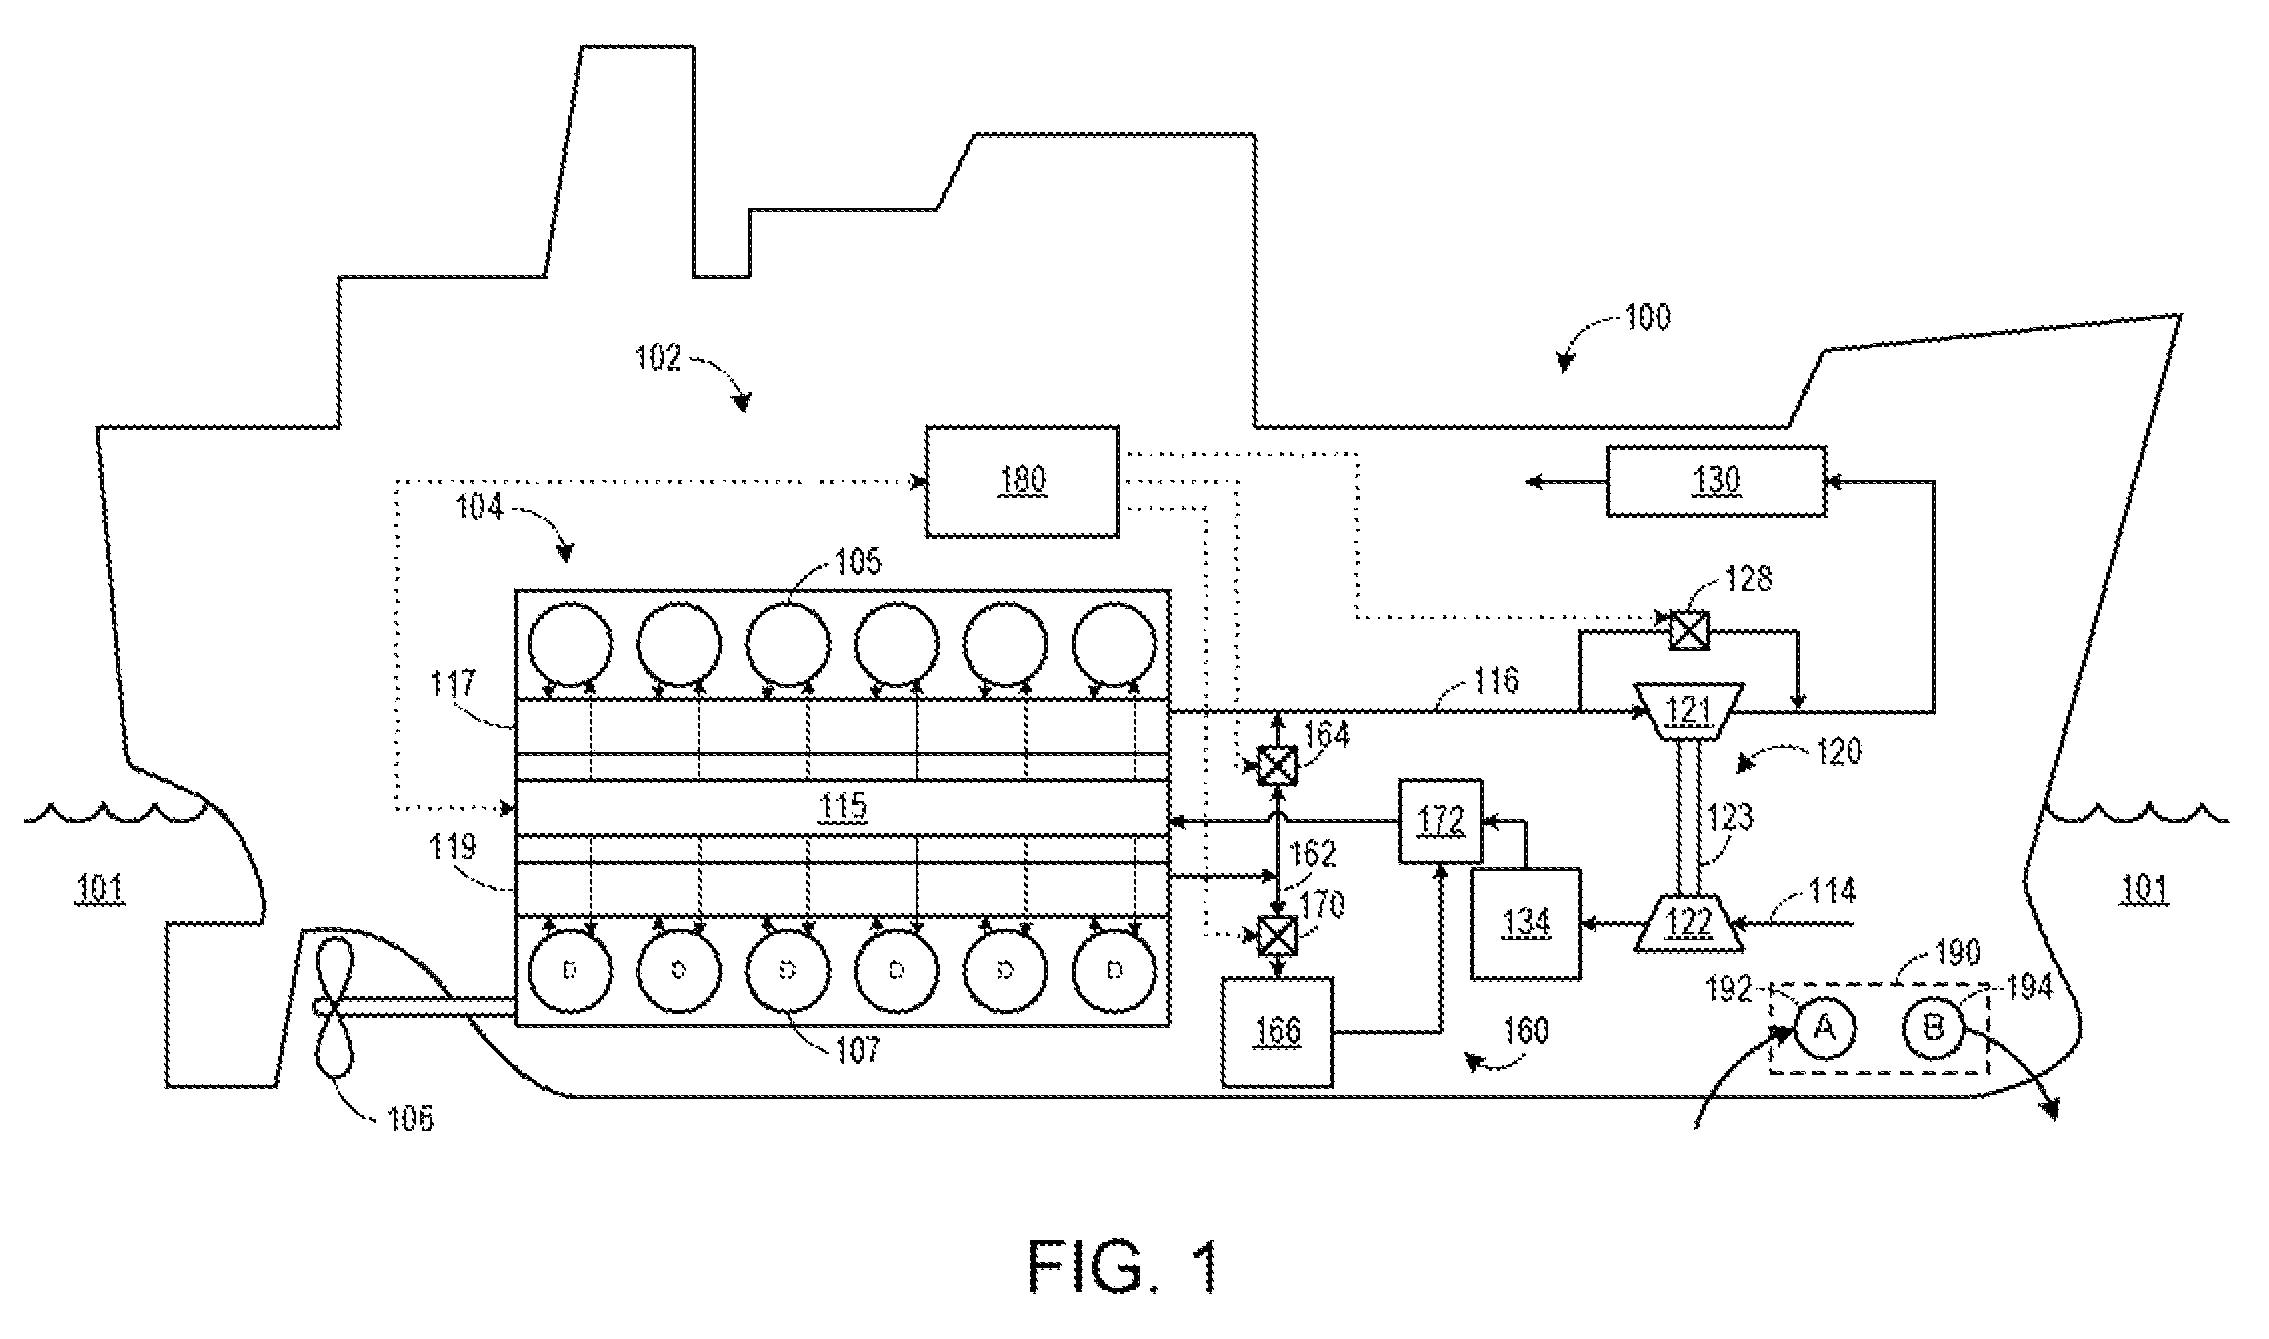 Systems and methods for a cooling fluid circuit